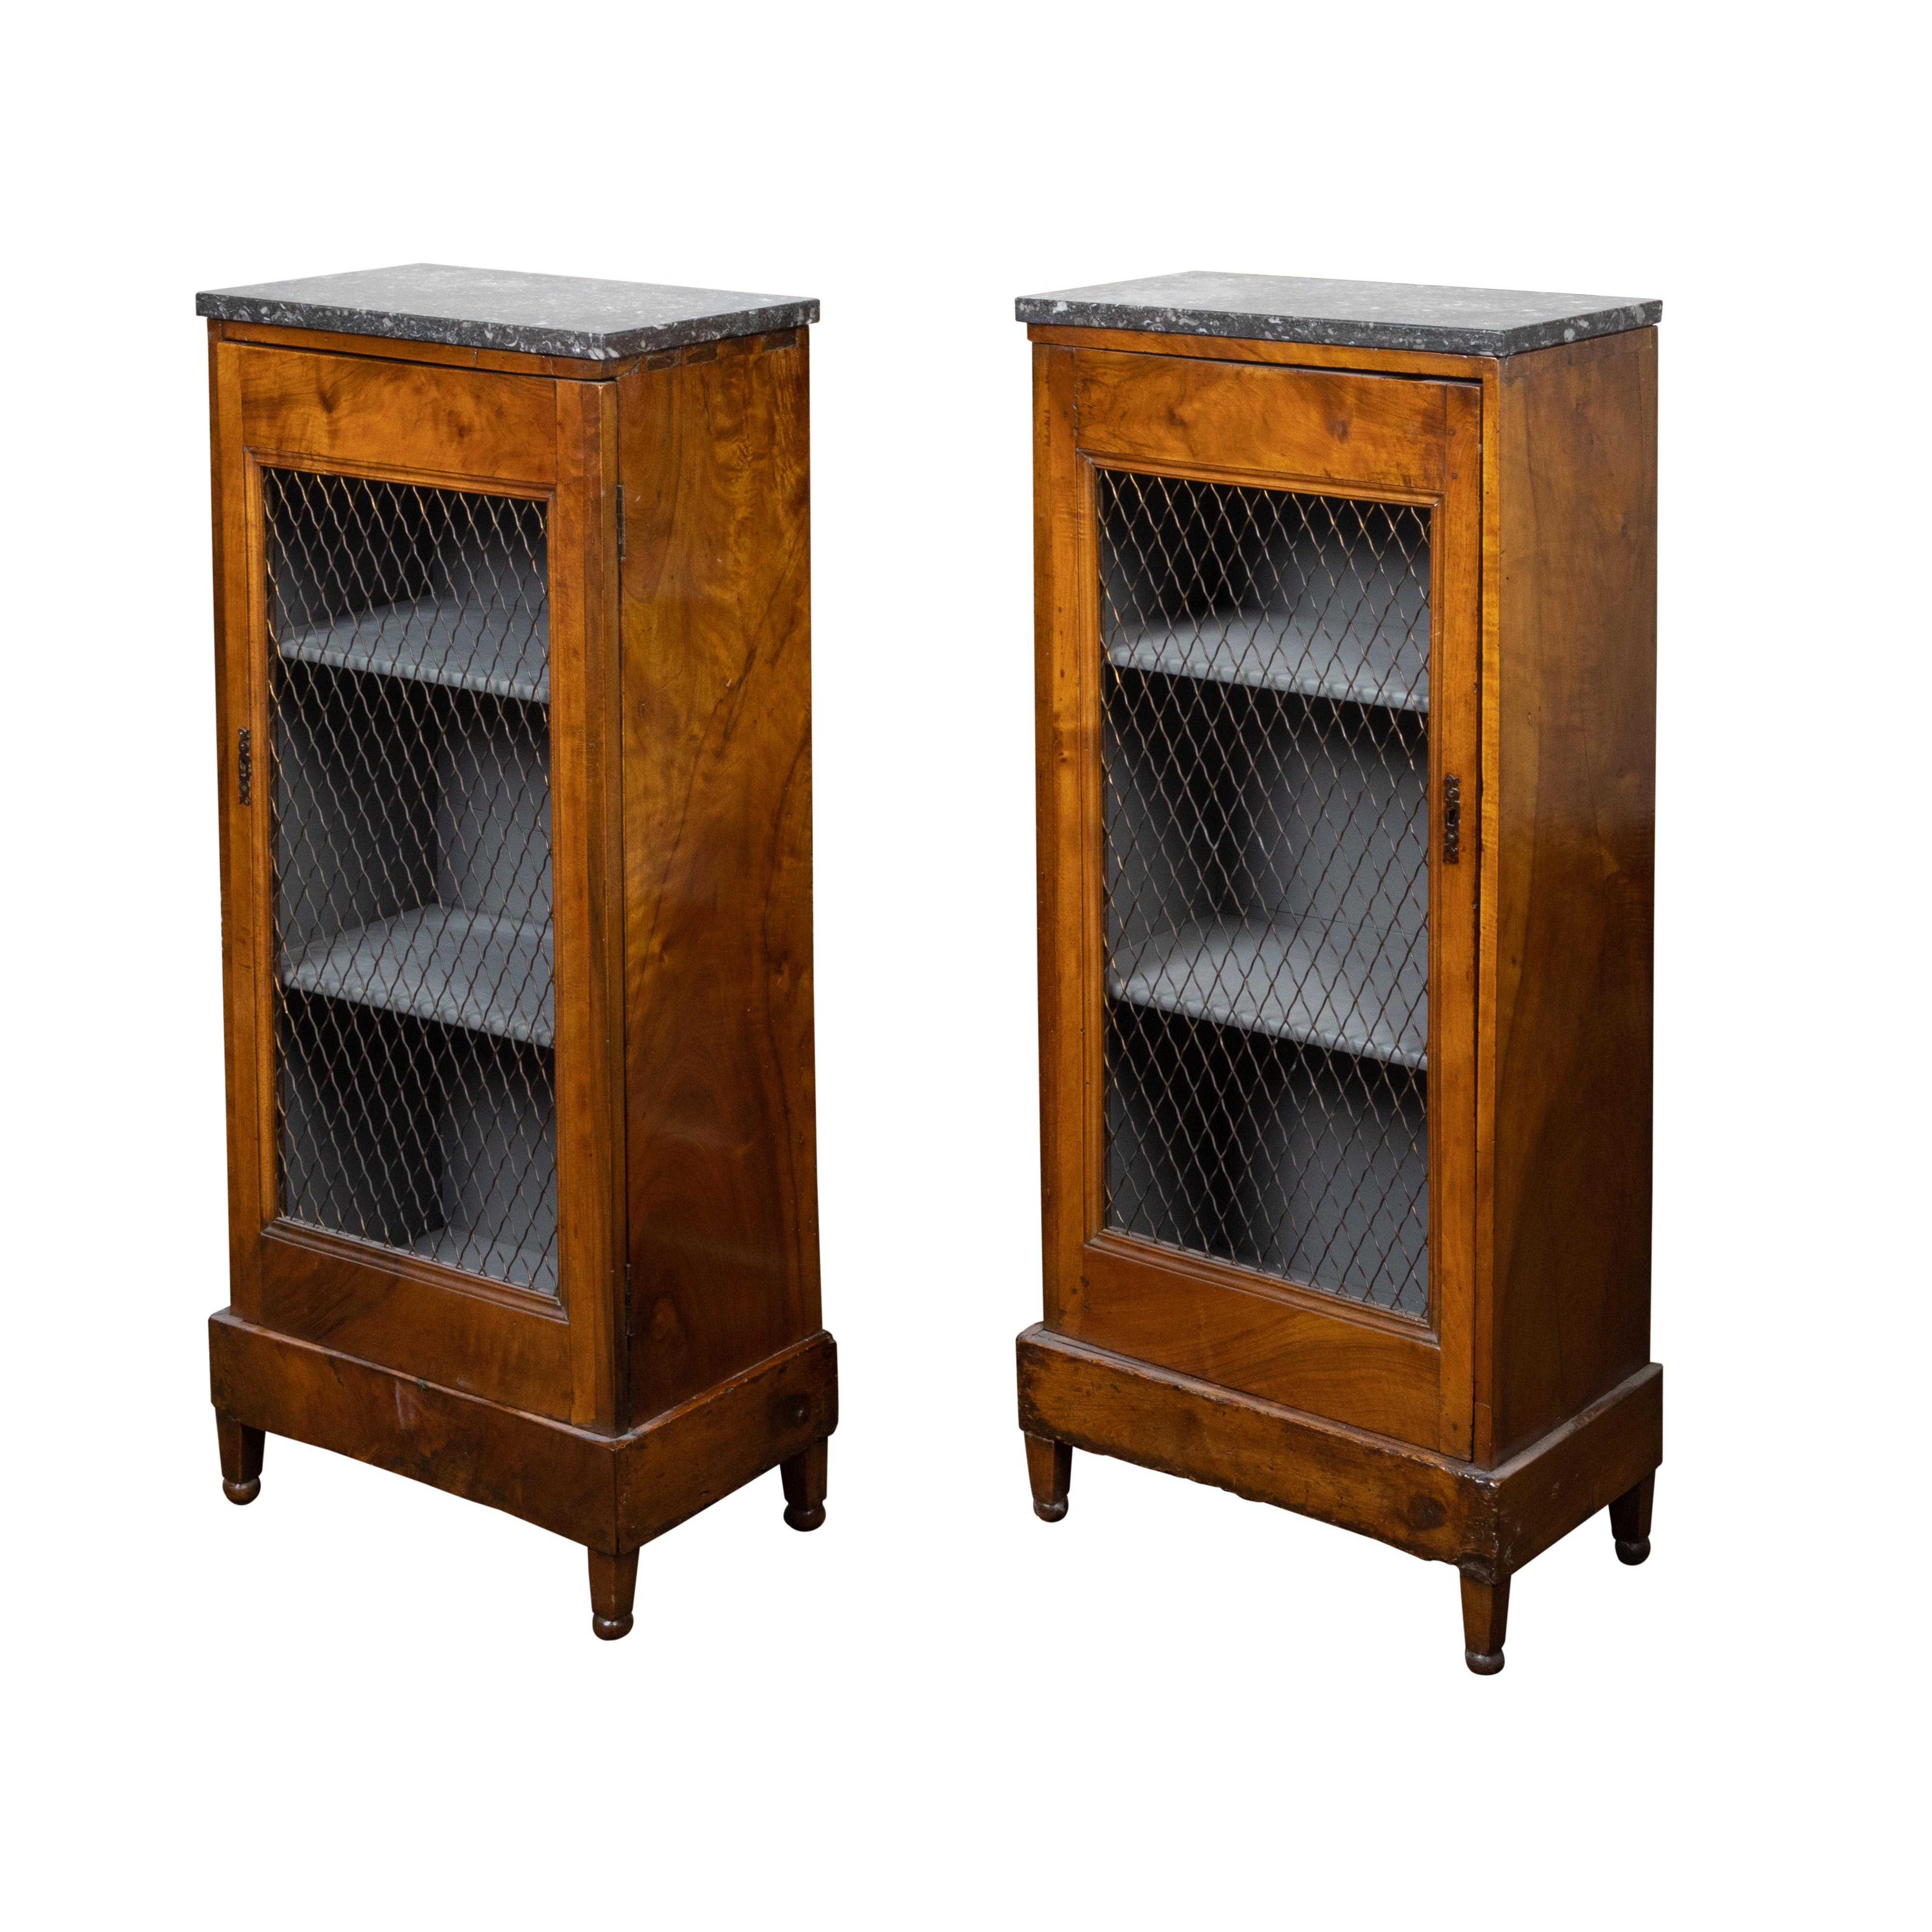 Pair of 19th Century French Small Cabinets with Marble Tops and Chicken Wire